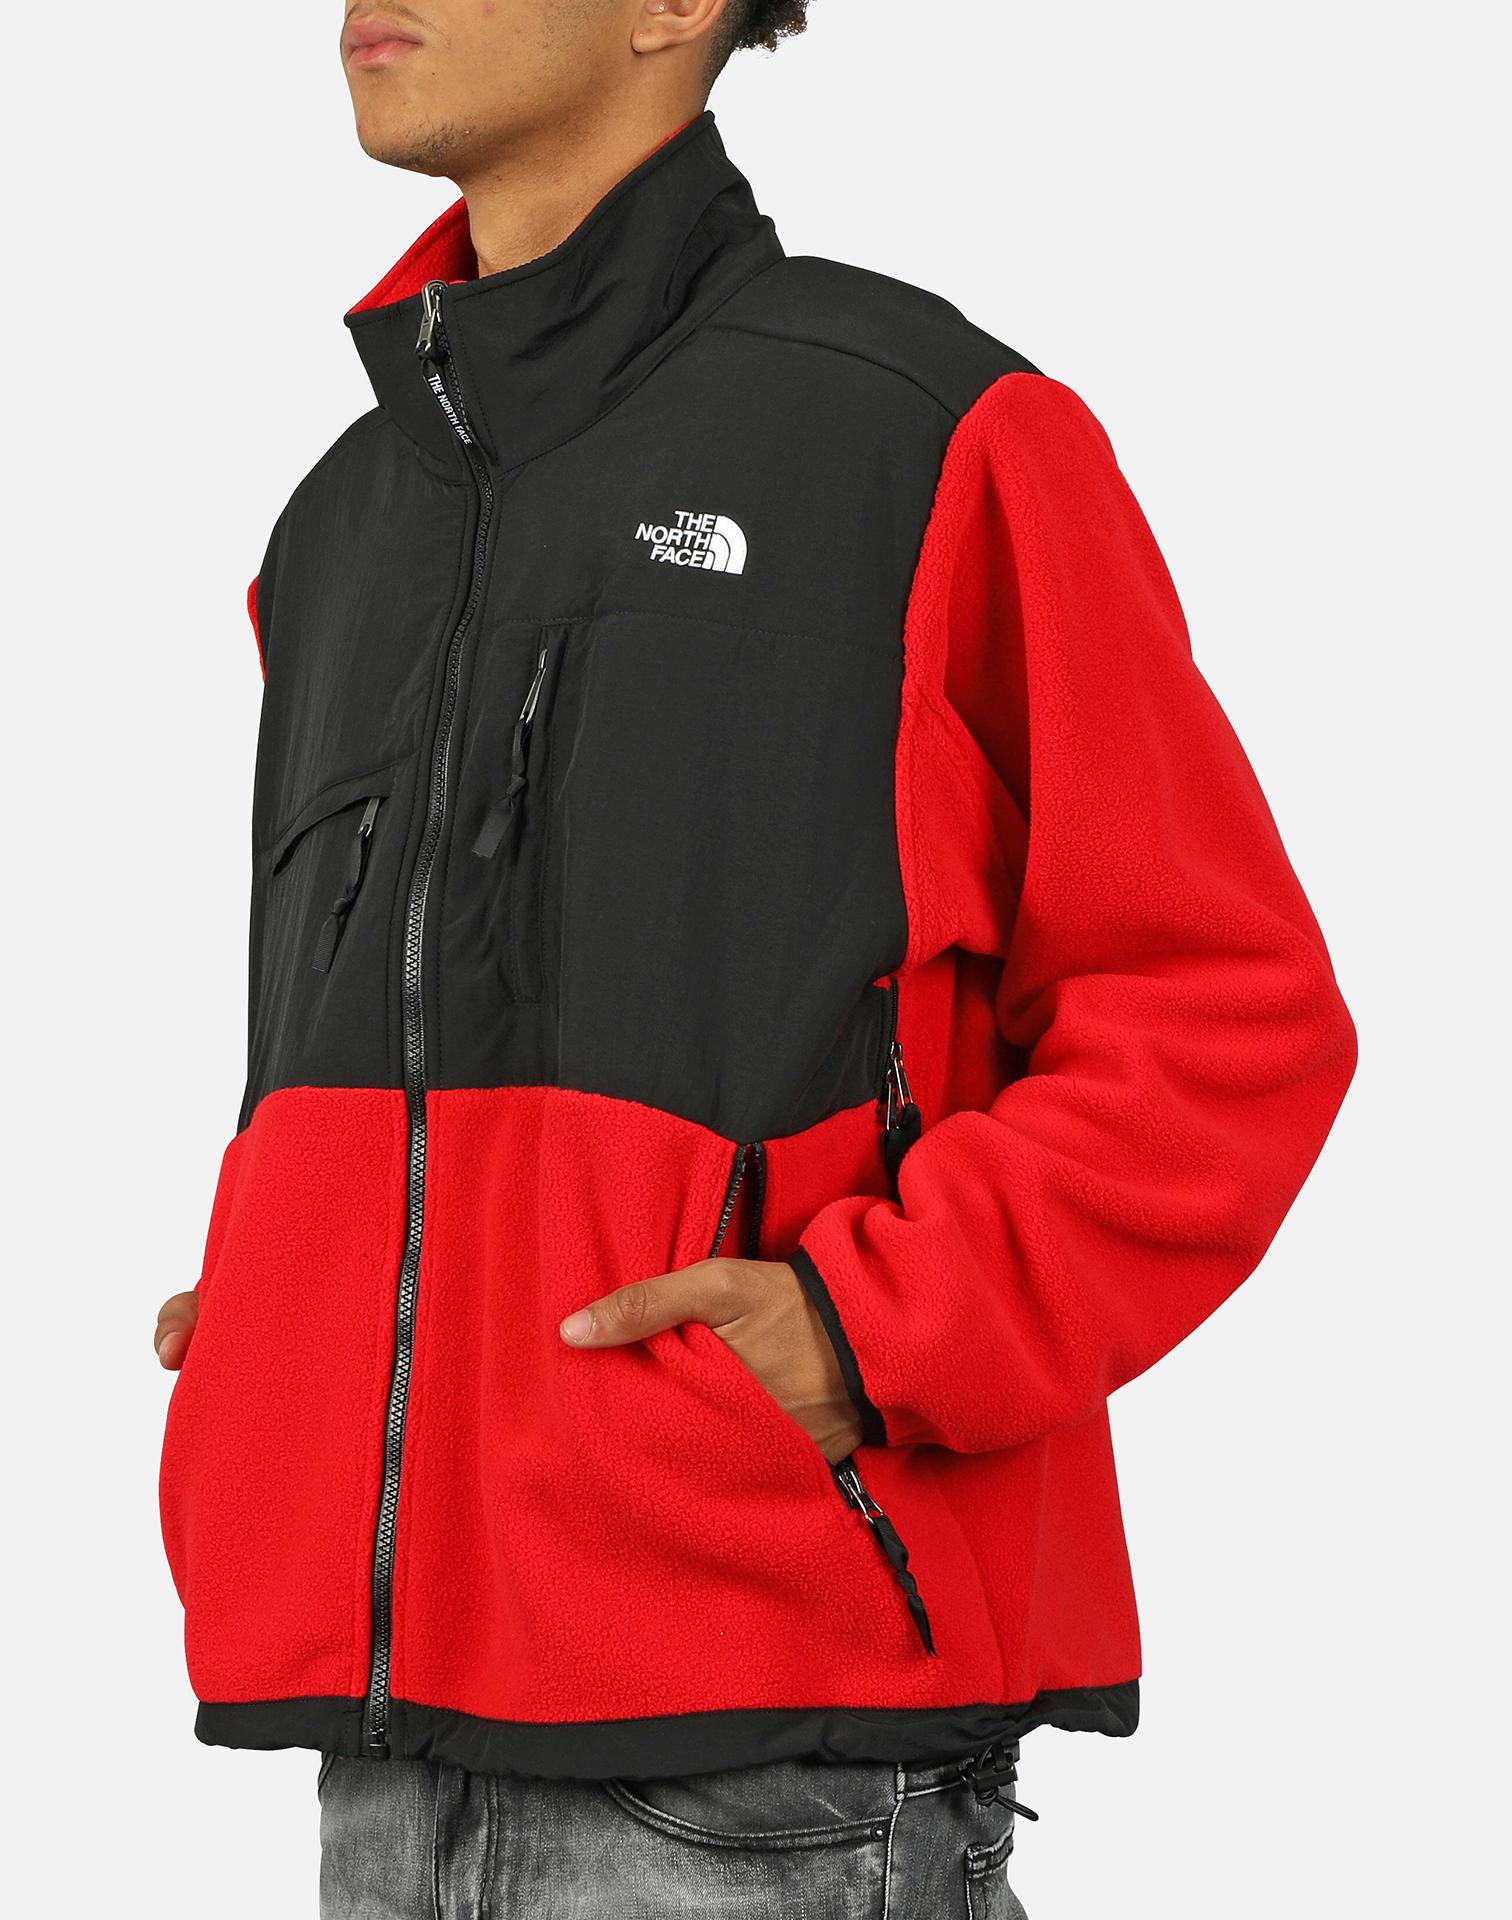 The North Face Fleece 1995 Retro Denali Jacket in Red for Men - Lyst